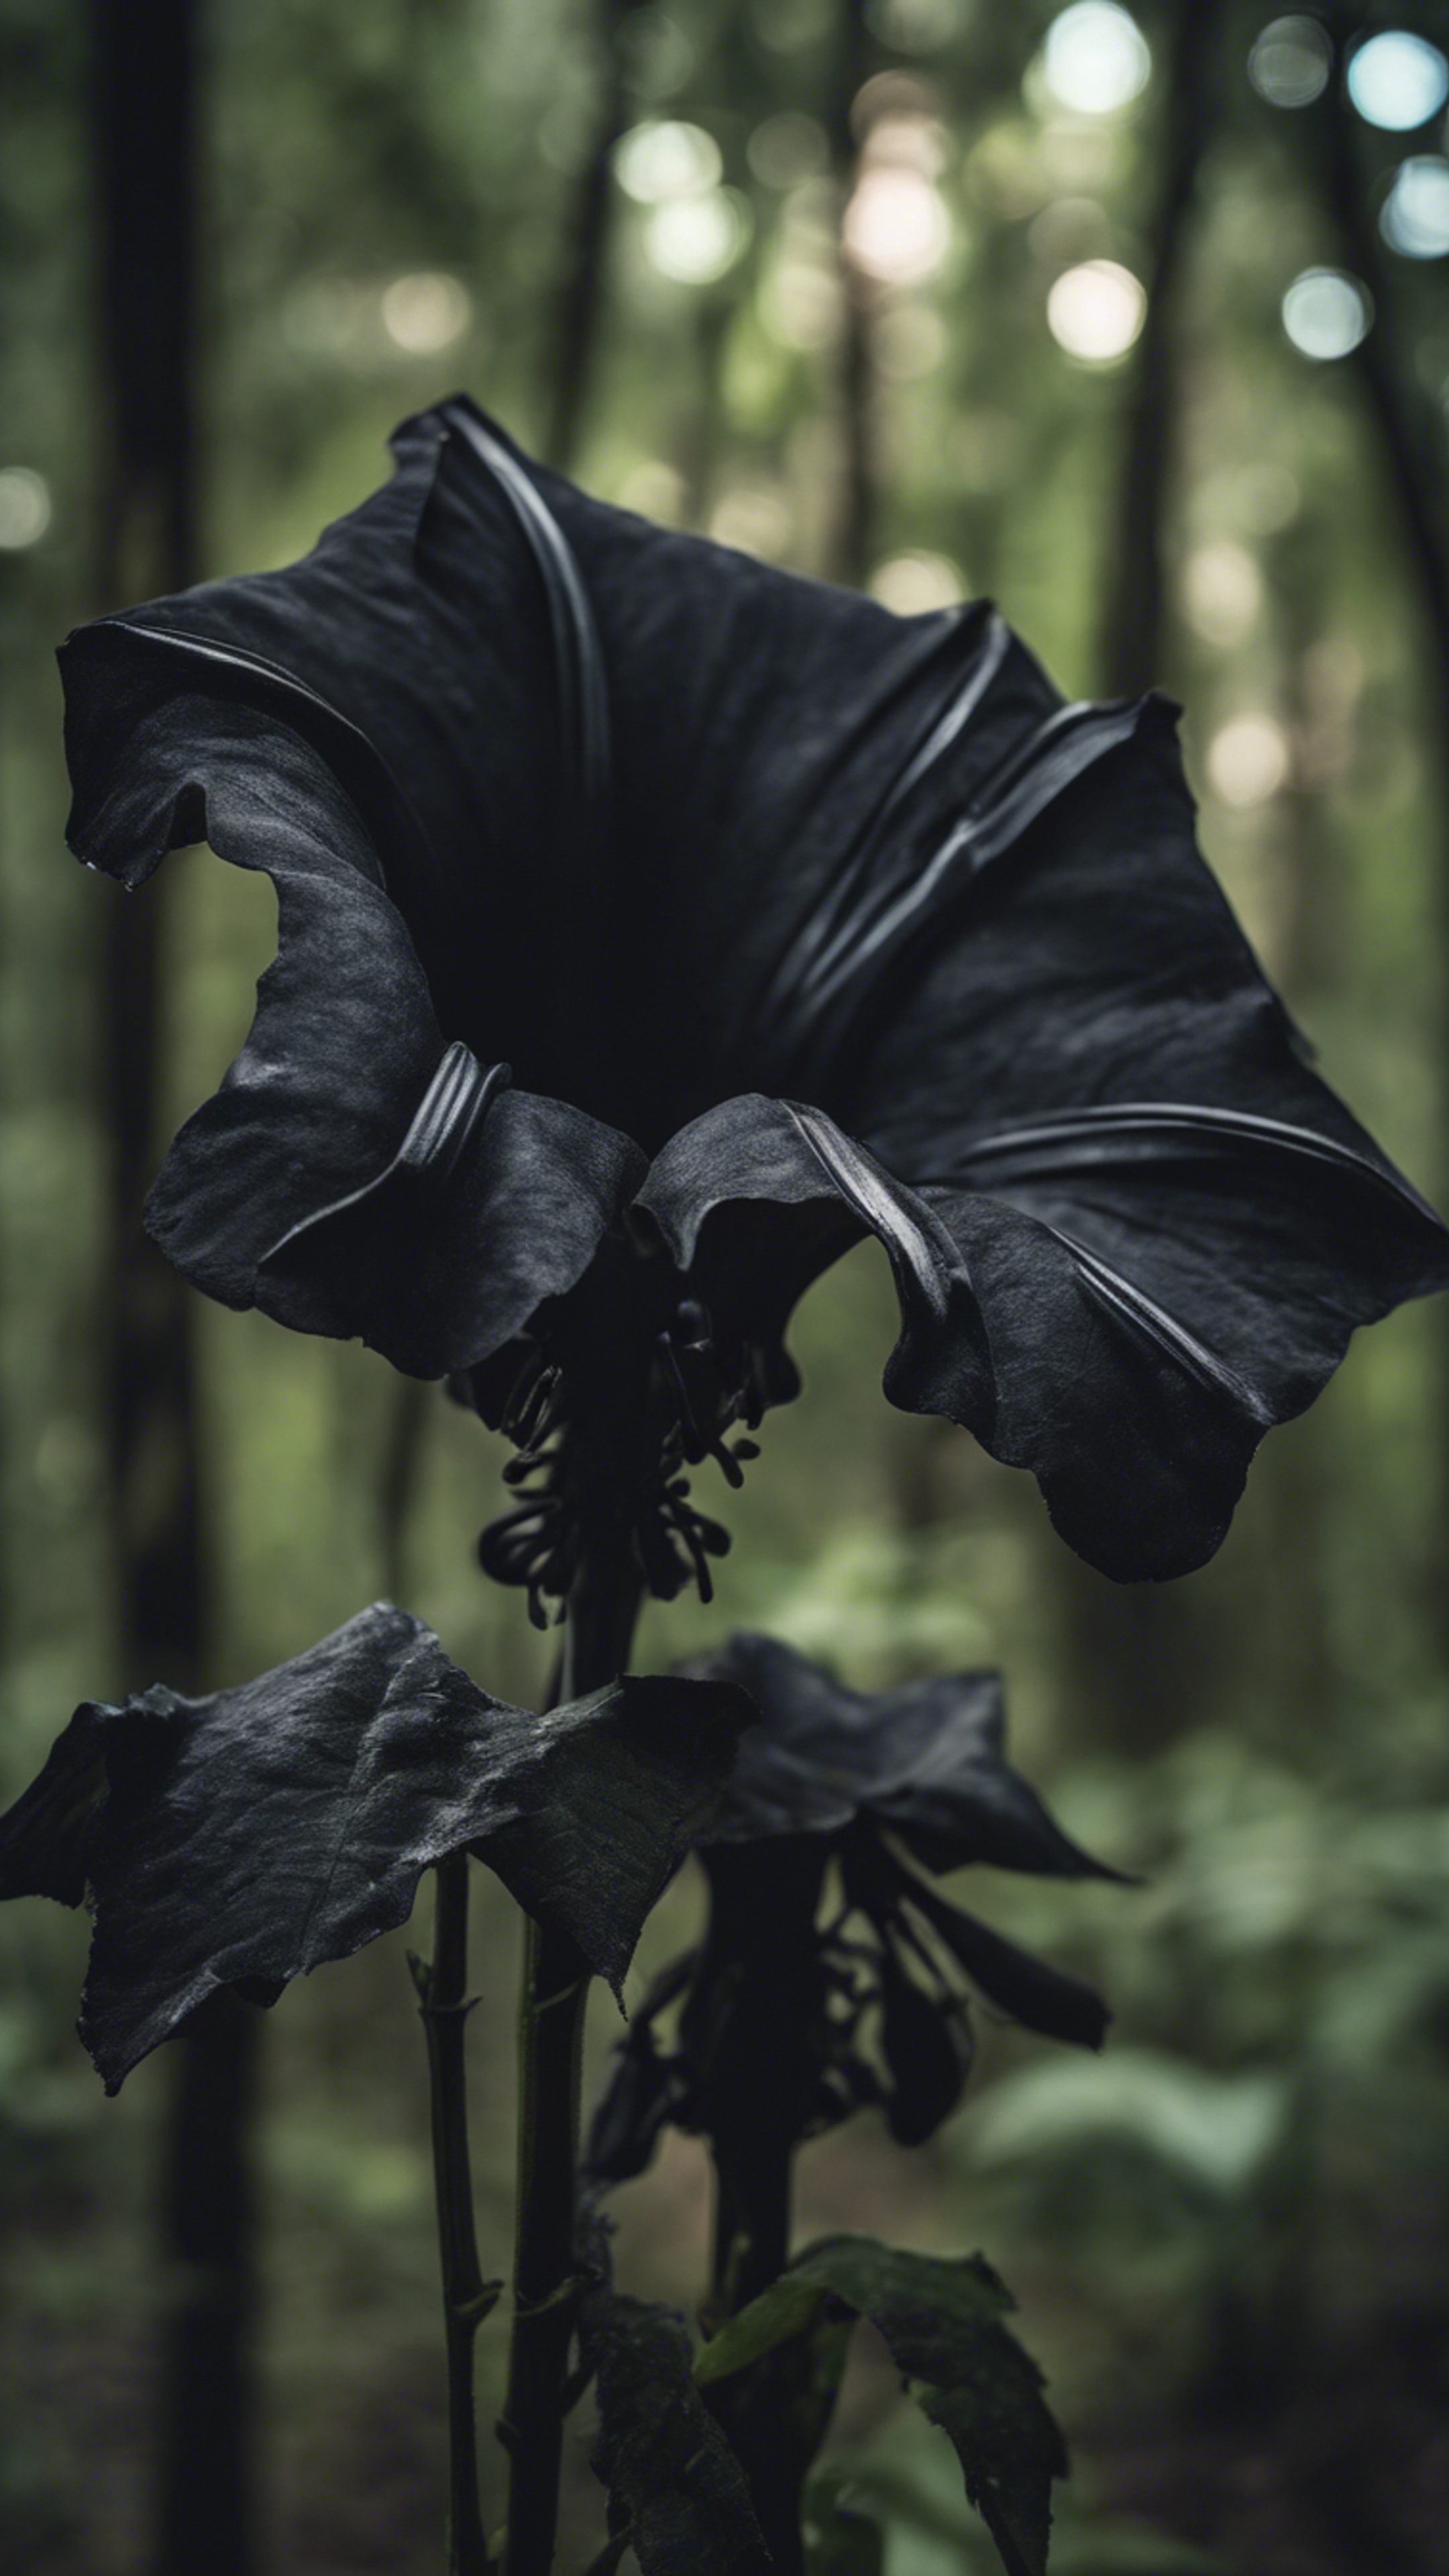 A black trumpet flower evoking an eerie yet captivating atmosphere in the heart of a dense forest. ورق الجدران[87d98efd7999478c8568]